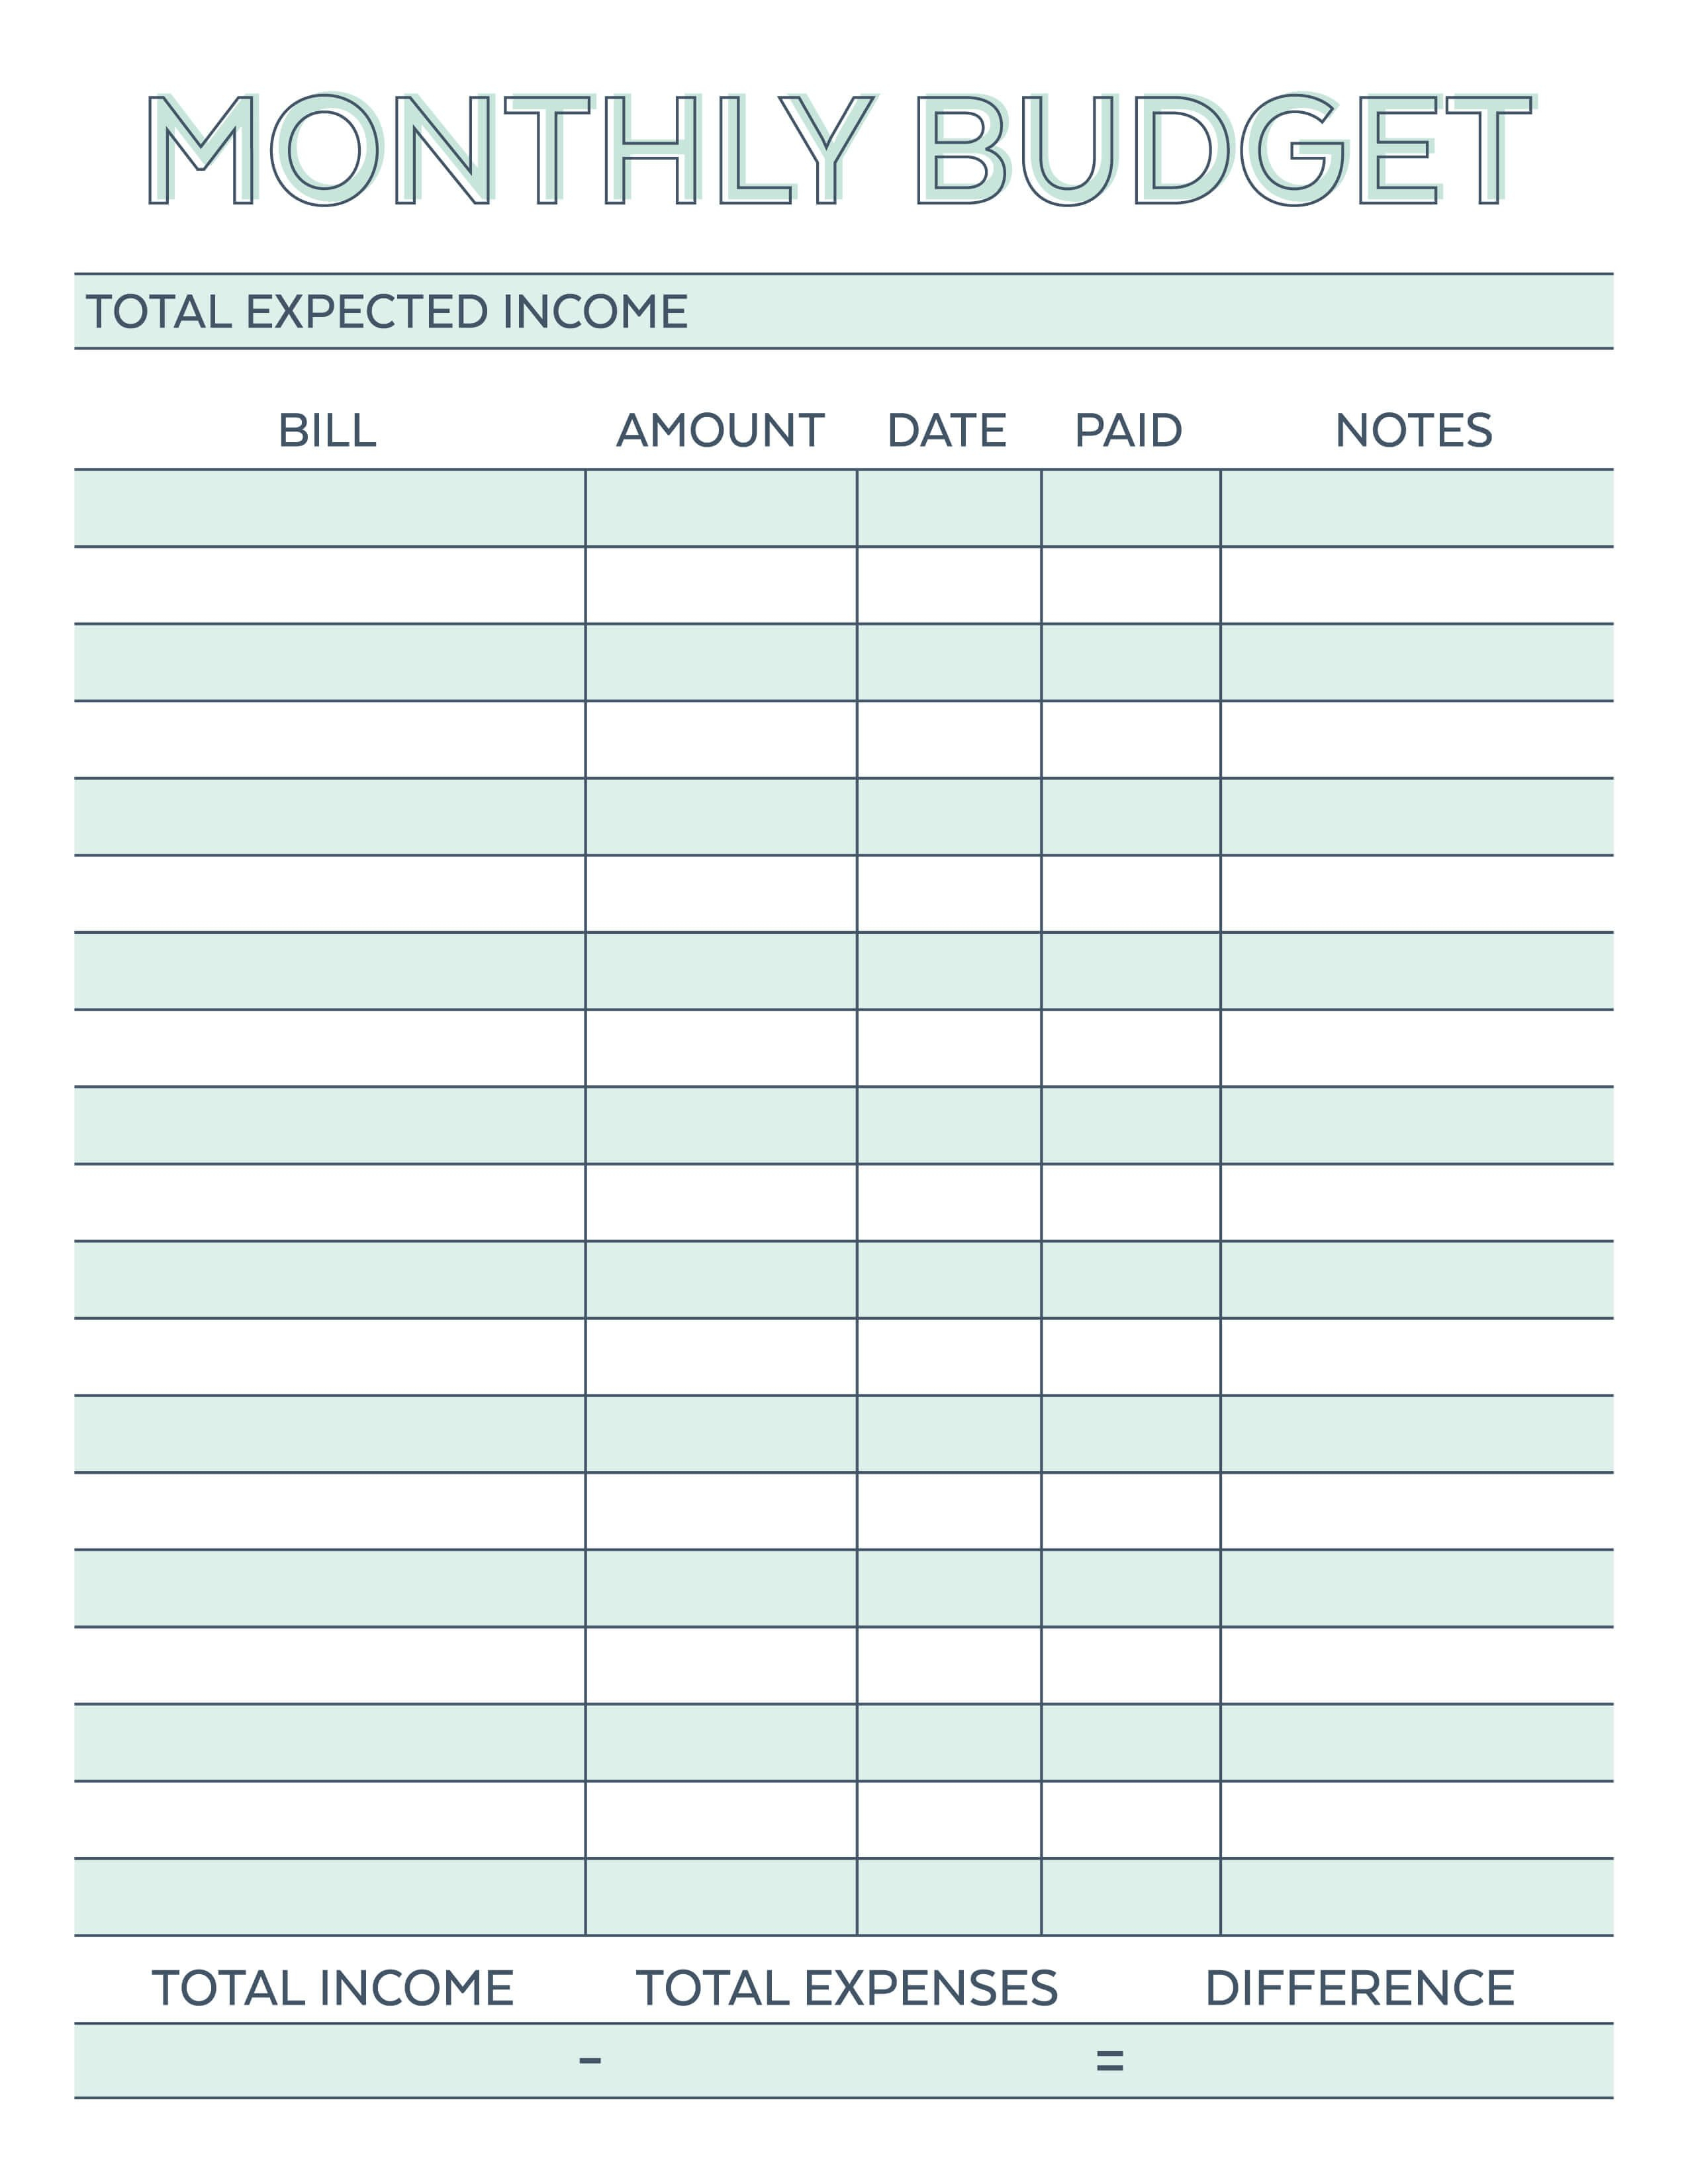 Monthly Budget Planner  Free Printable Budget Worksheet With Budget Planner Worksheet